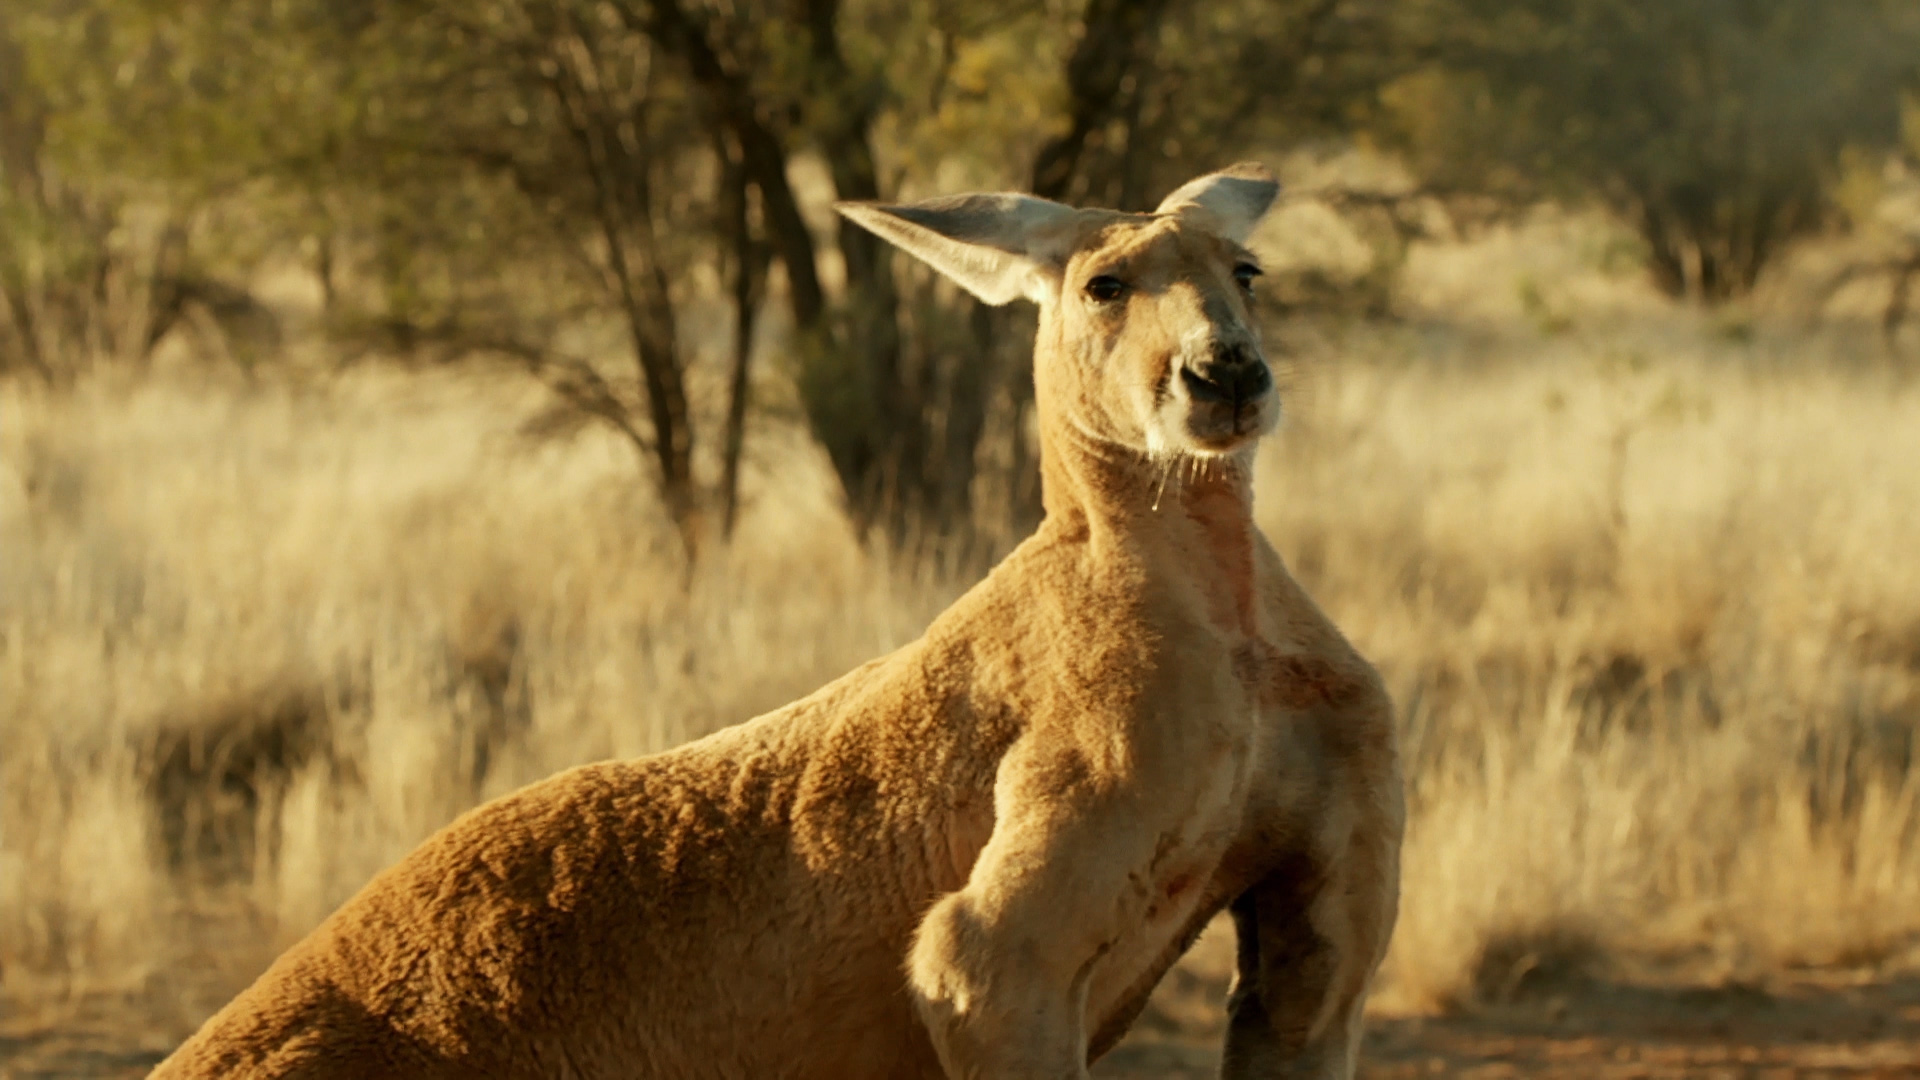 That's Roger! - Kangaroo Dundee Video - National Geographic Channel